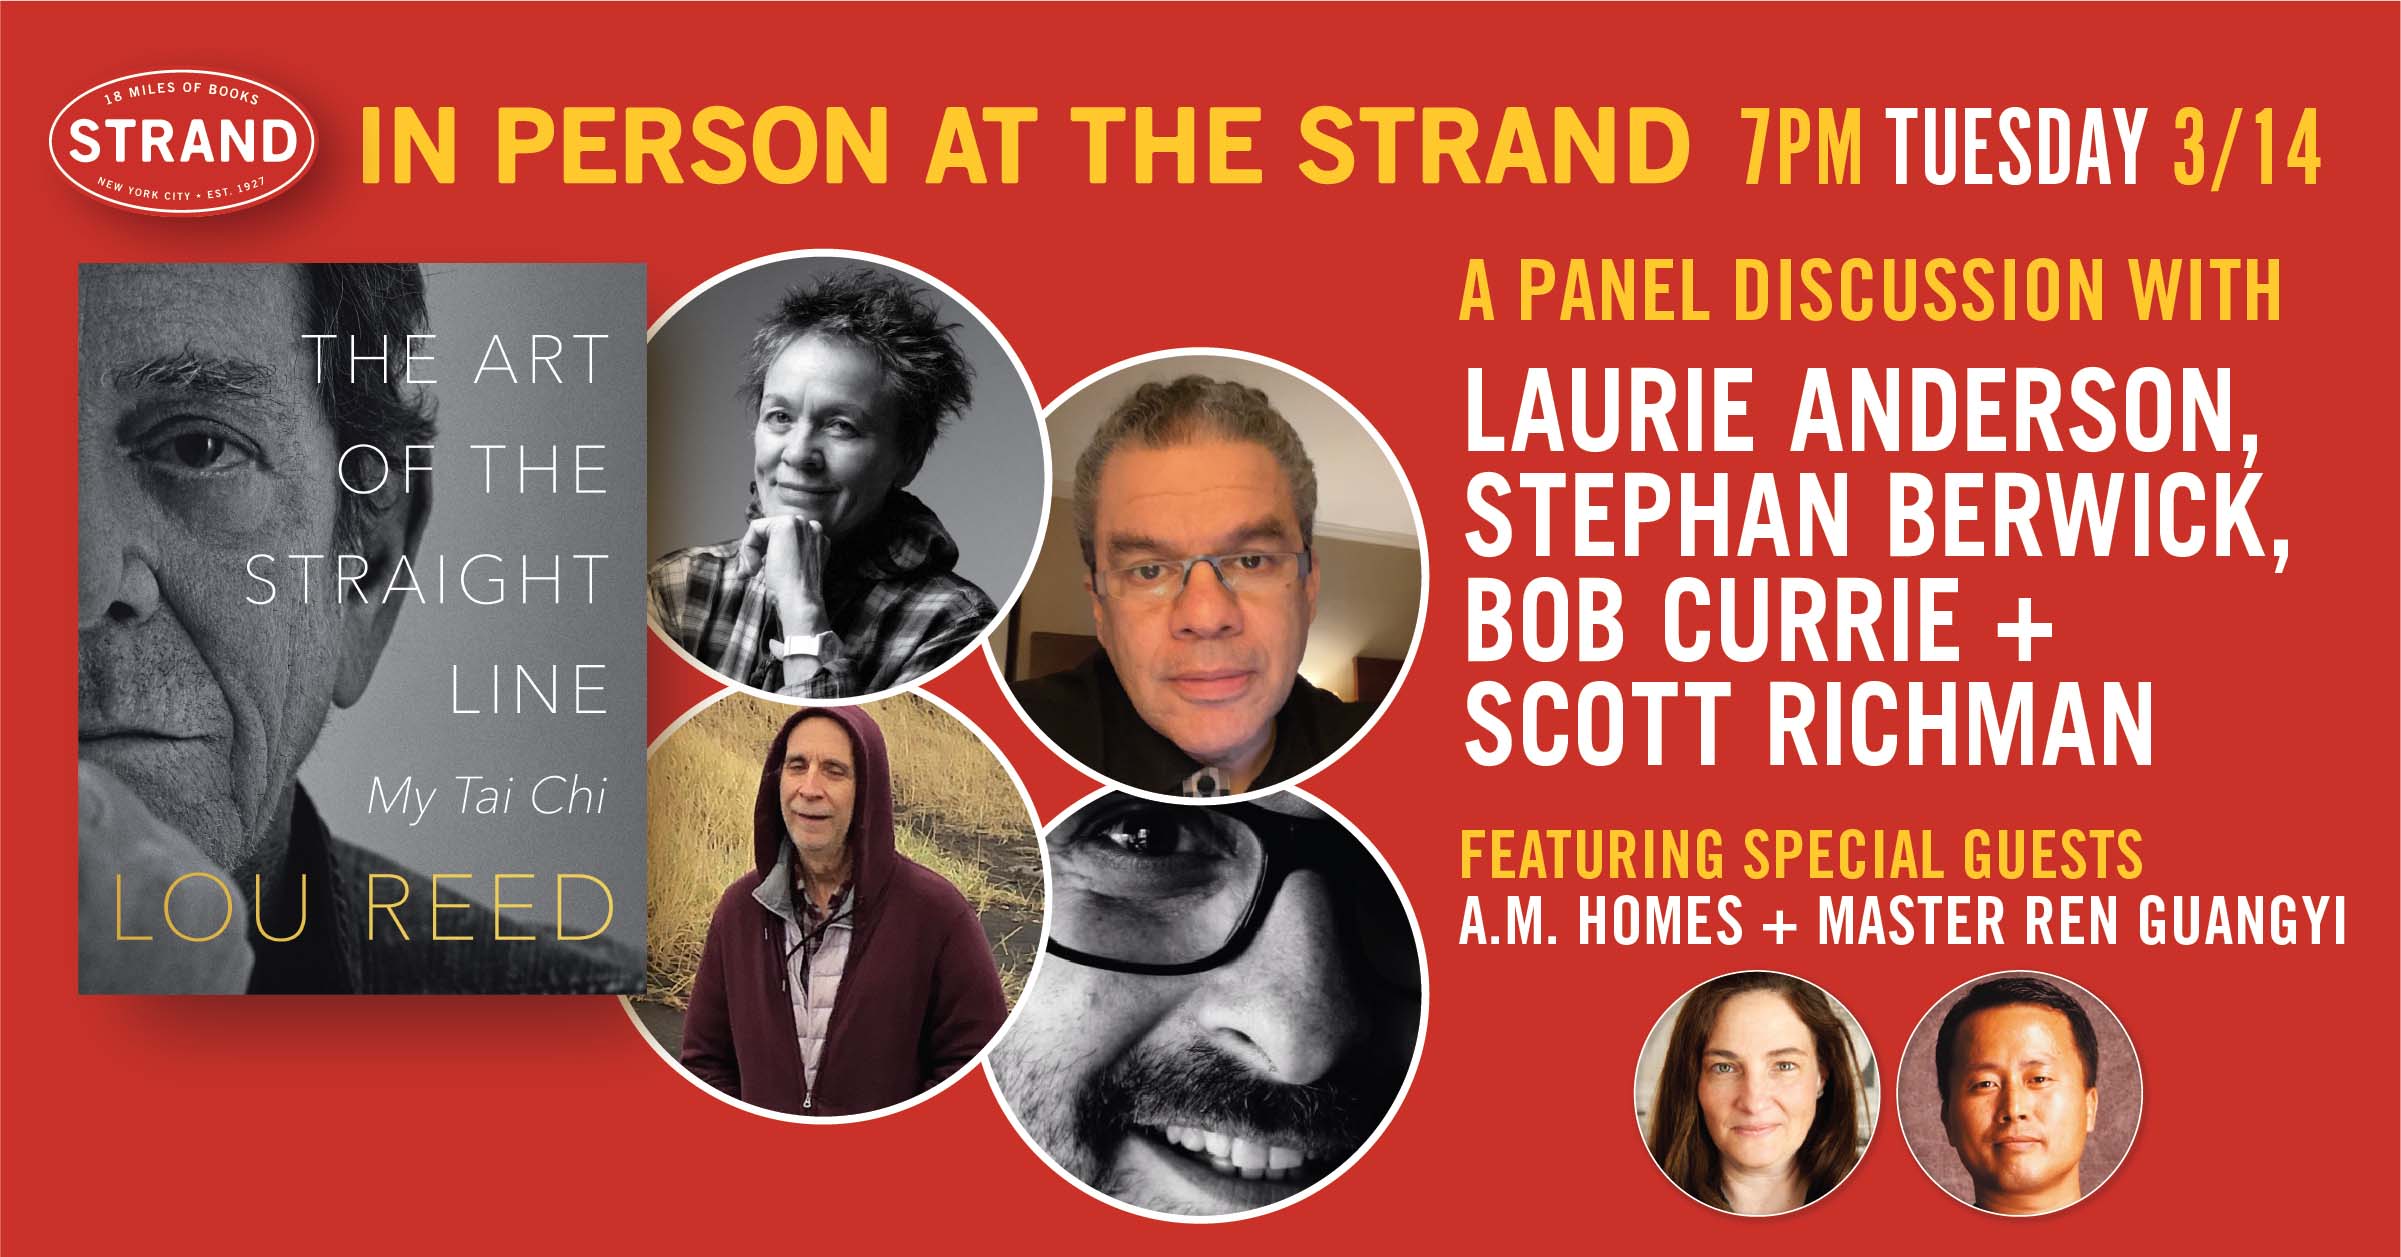 Art of the Straight Line Panel Discussion at the Strand